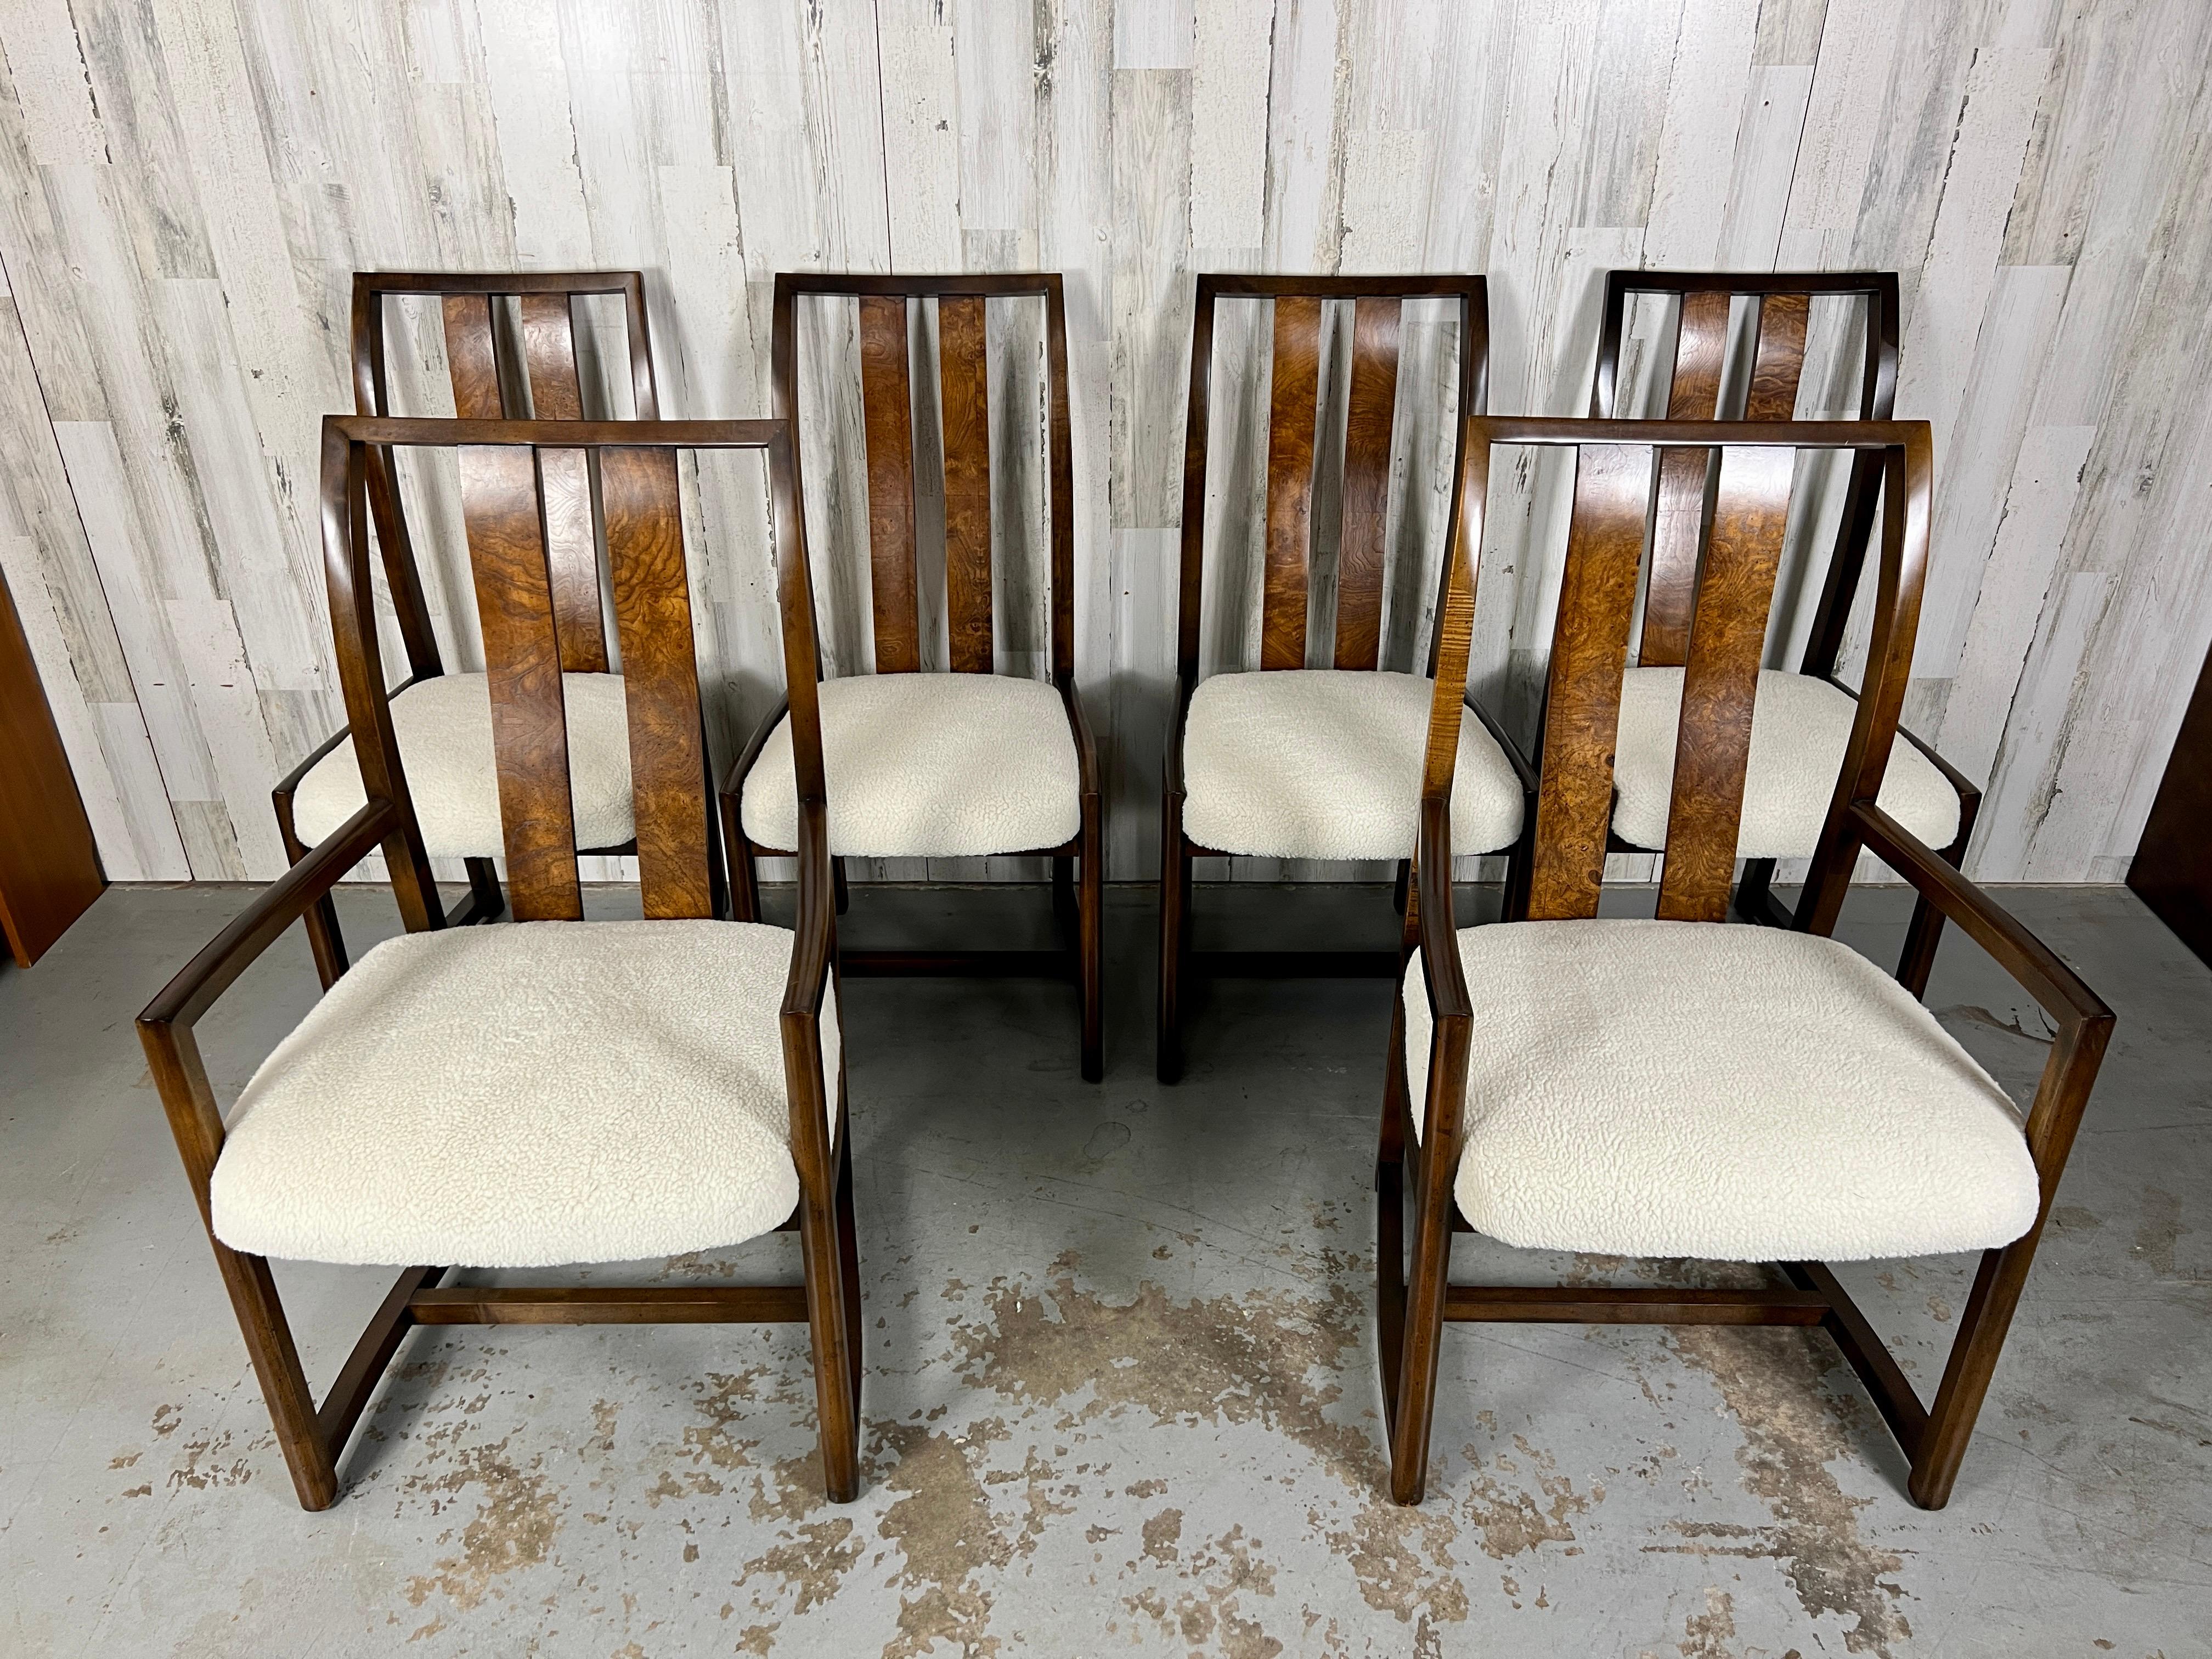 1980s dining chairs